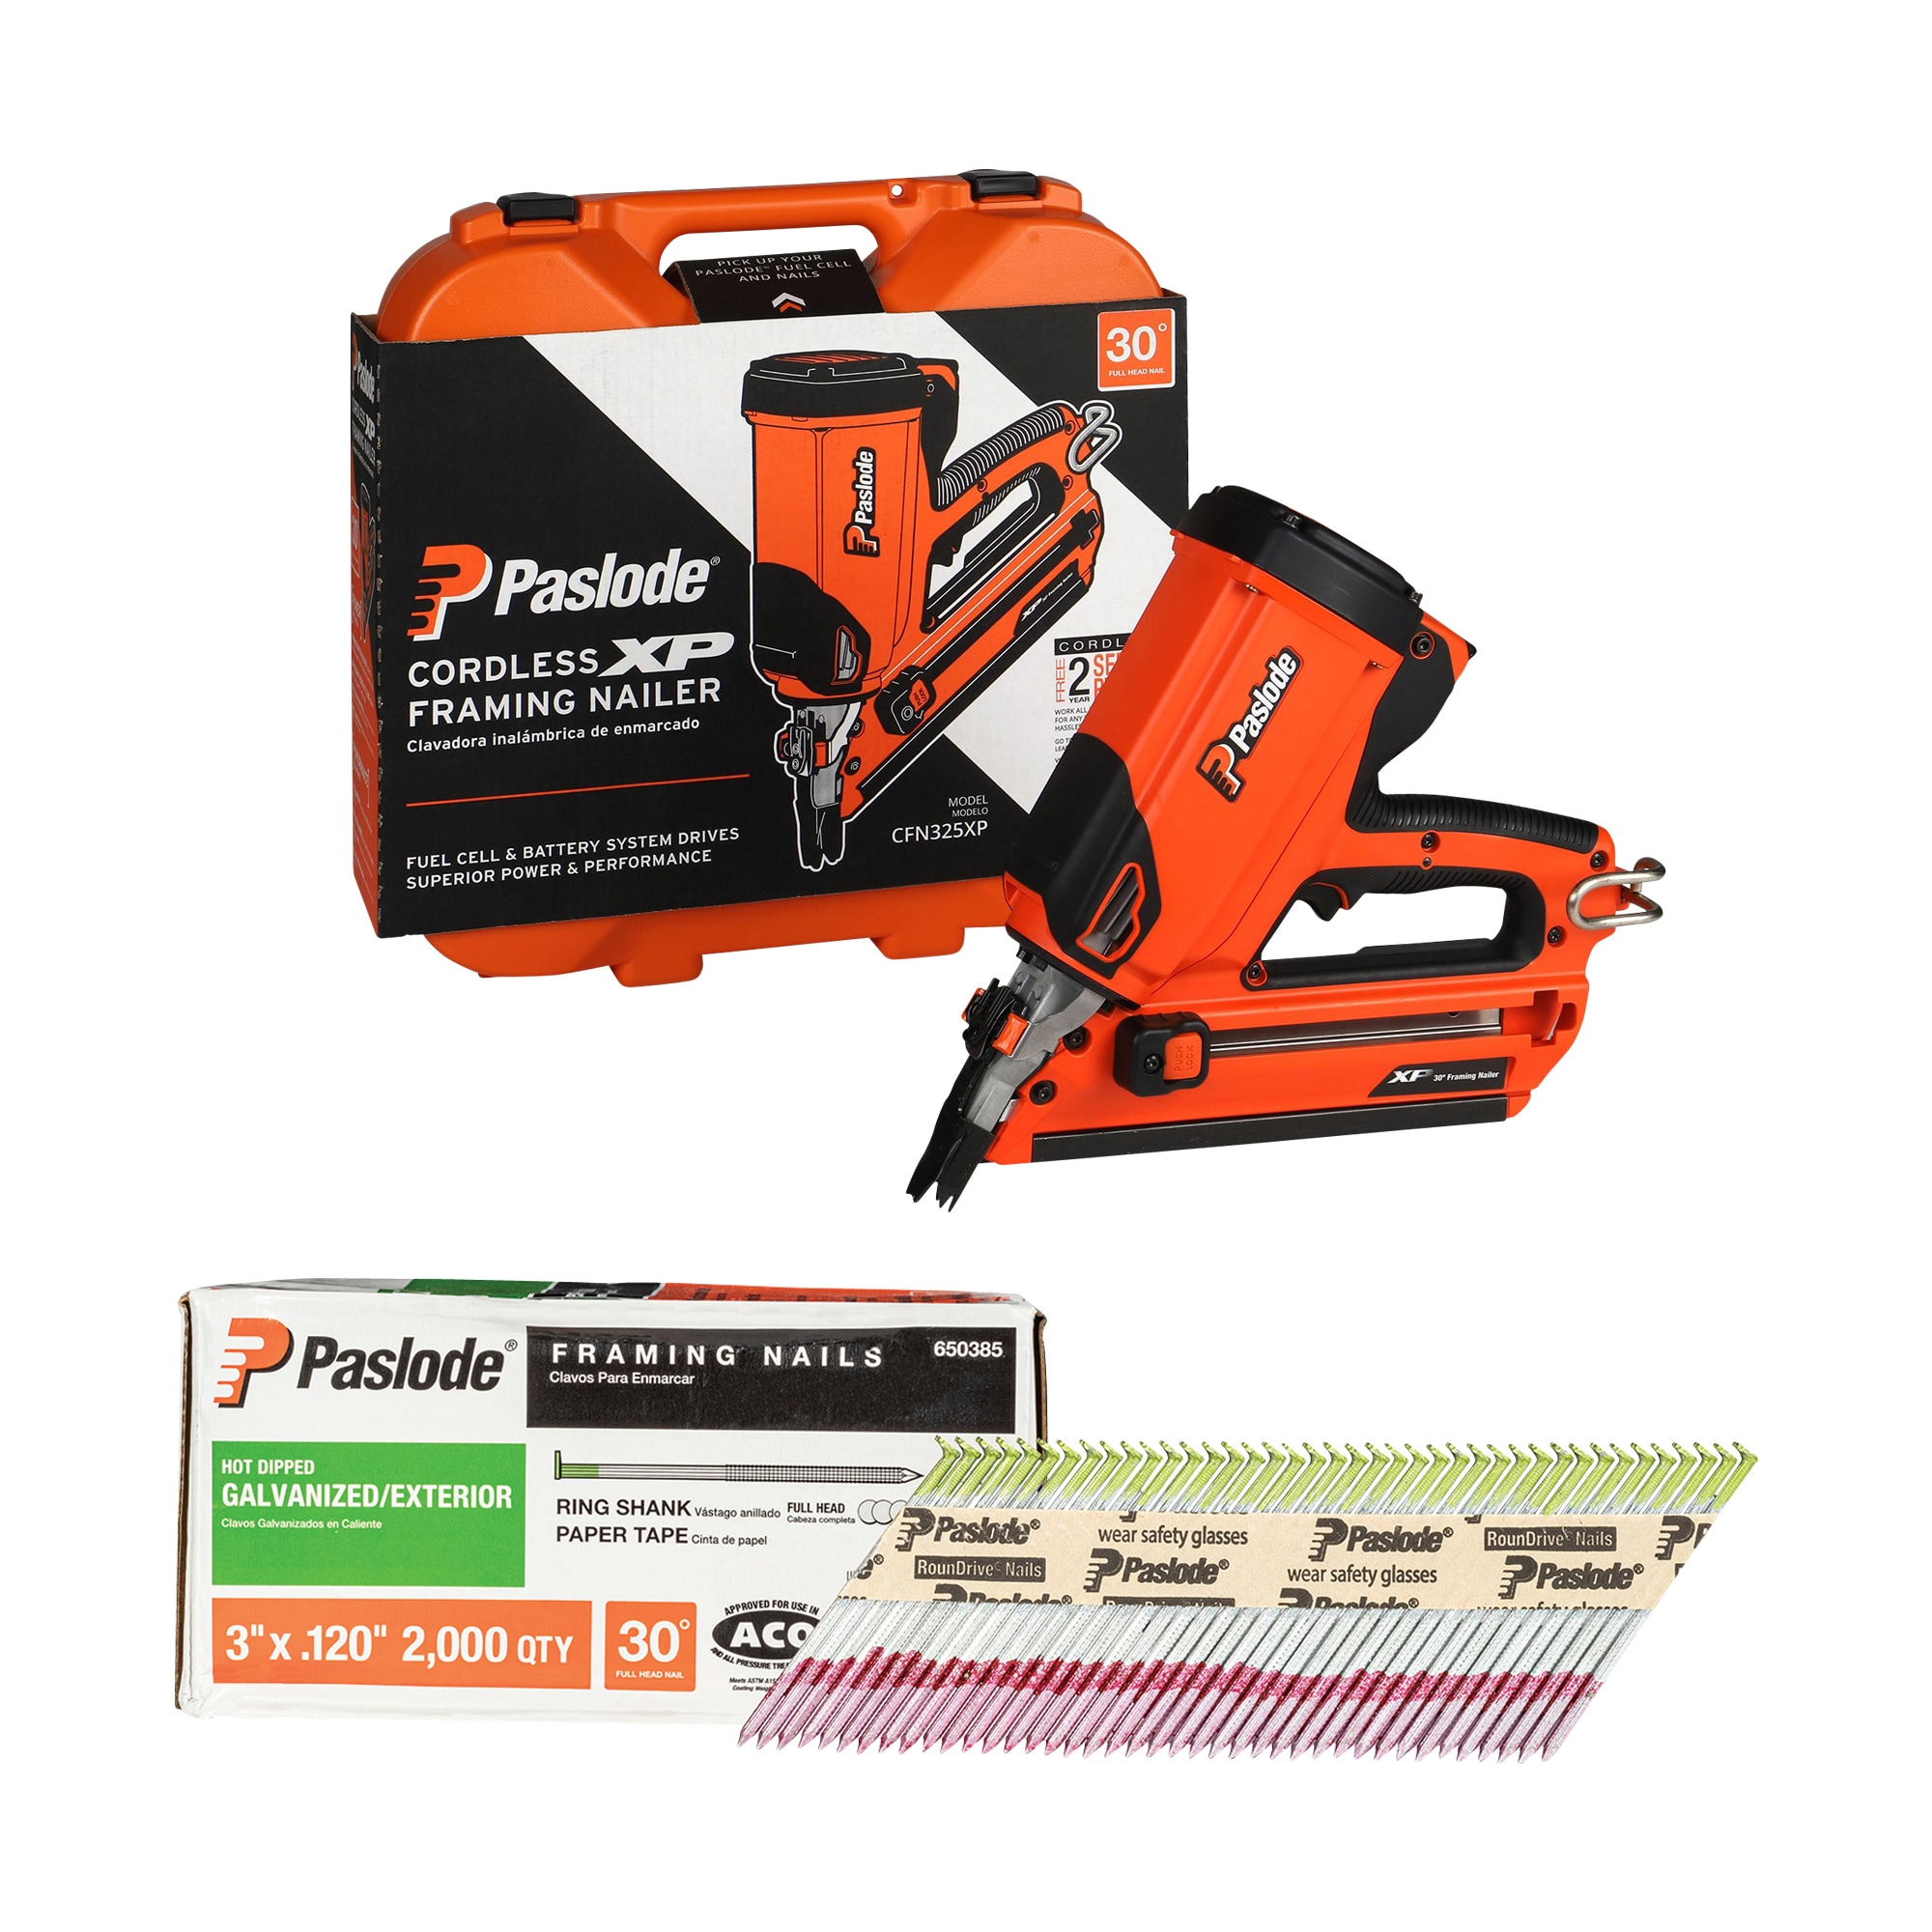 Shop Paslode Cordless XP with 750 Count 3